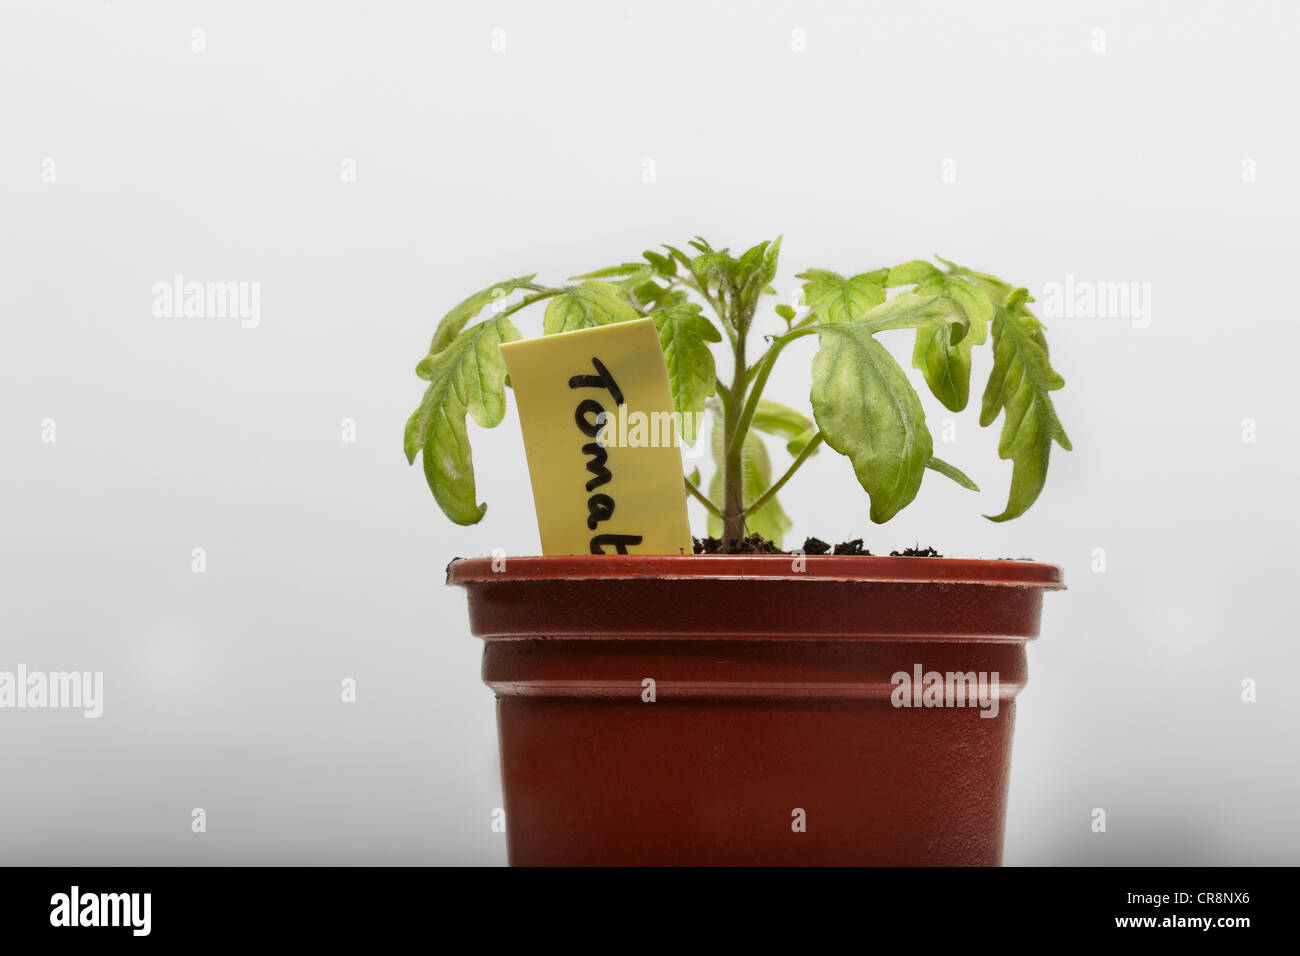 Tomato plant growing in flower pot Stock Photo